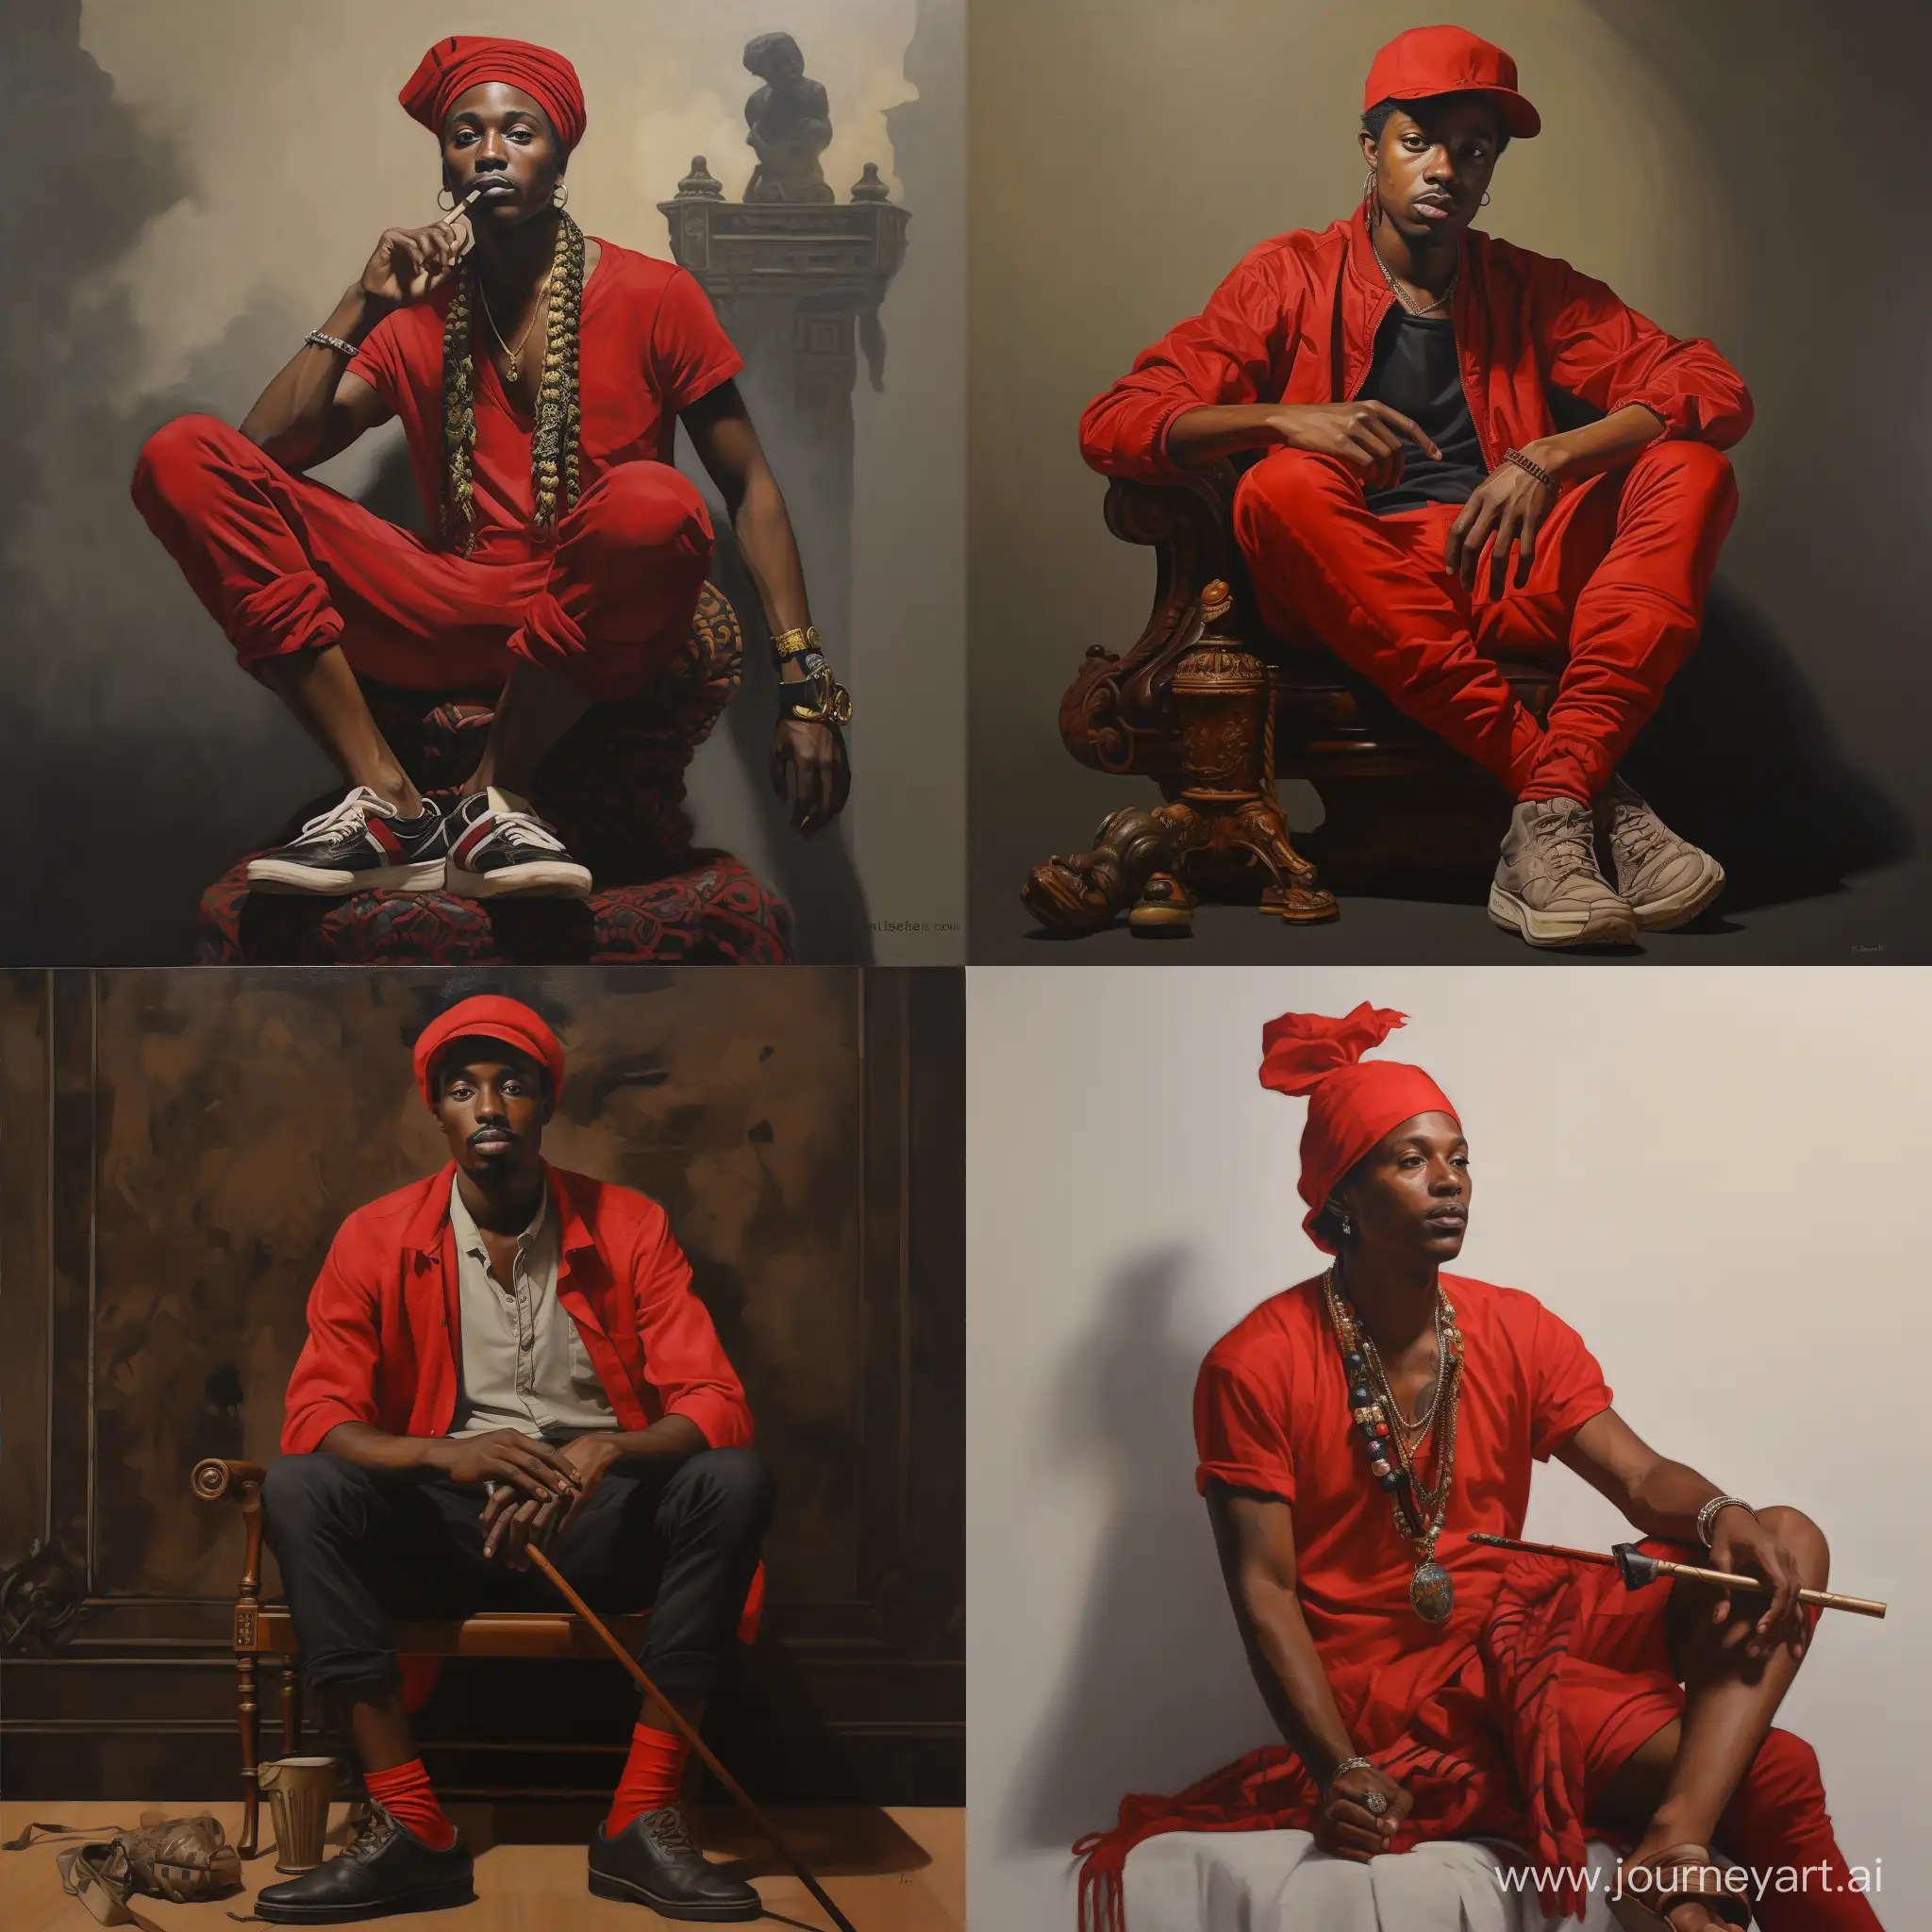 Saci-Perere-Unique-OneLegged-Black-Man-Smoking-a-Pipe-in-Red-Cap